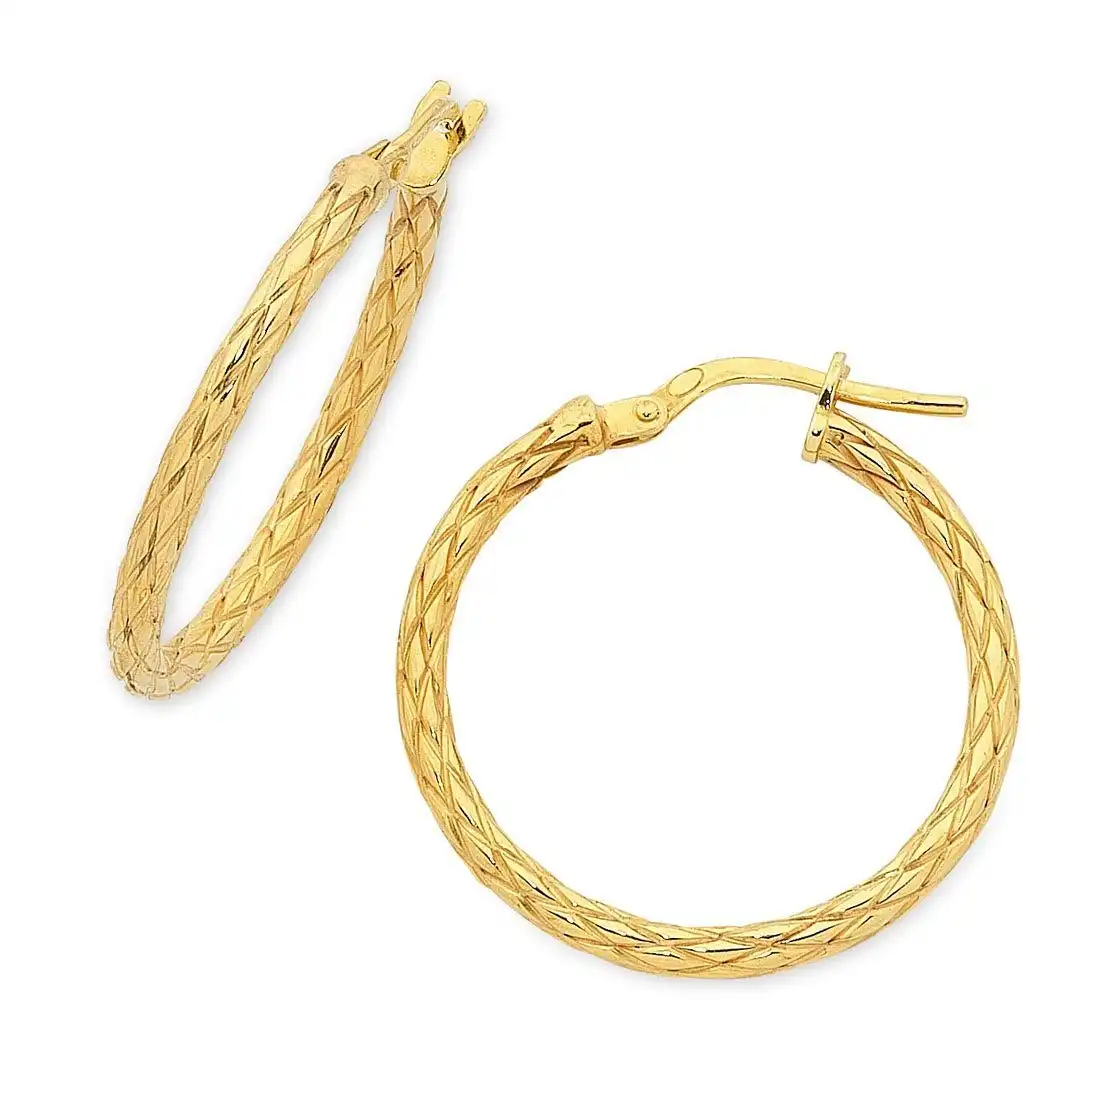 9ct Yellow Gold Silver Infused Patterned Hoop Earrings 20mm